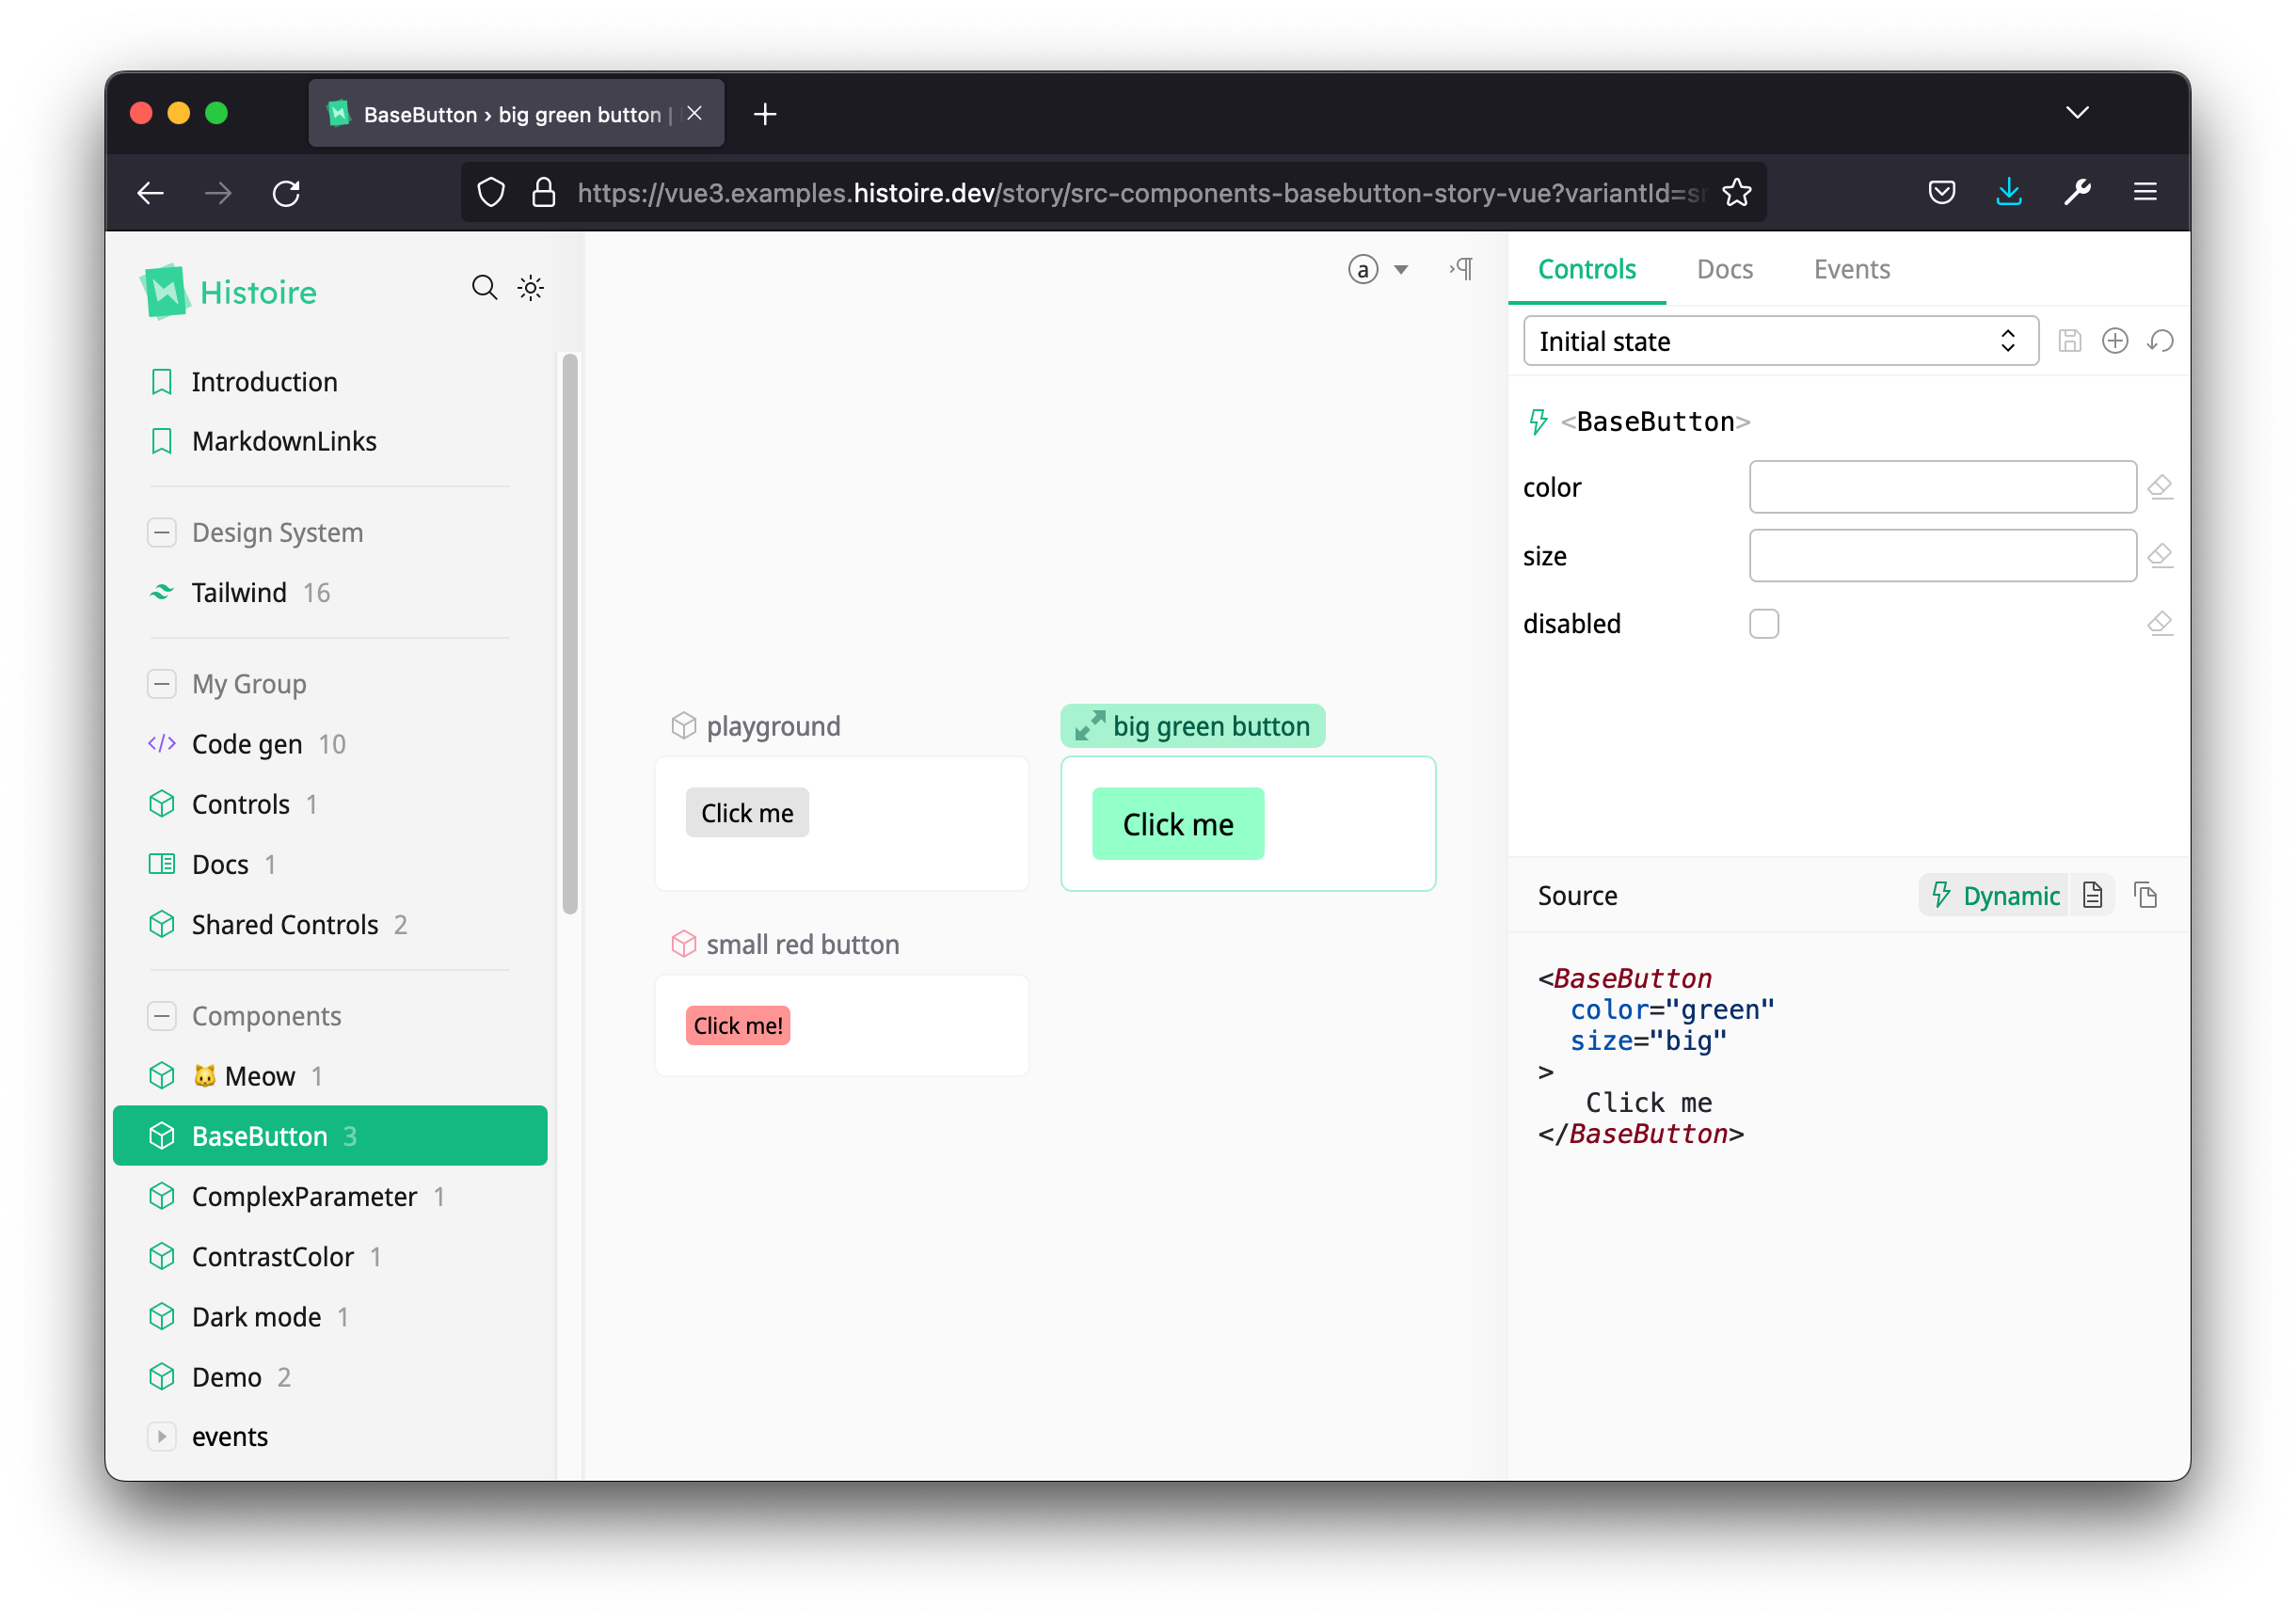 Screen of Histoire Vue 3 example at https://vue3.examples.histoire.dev